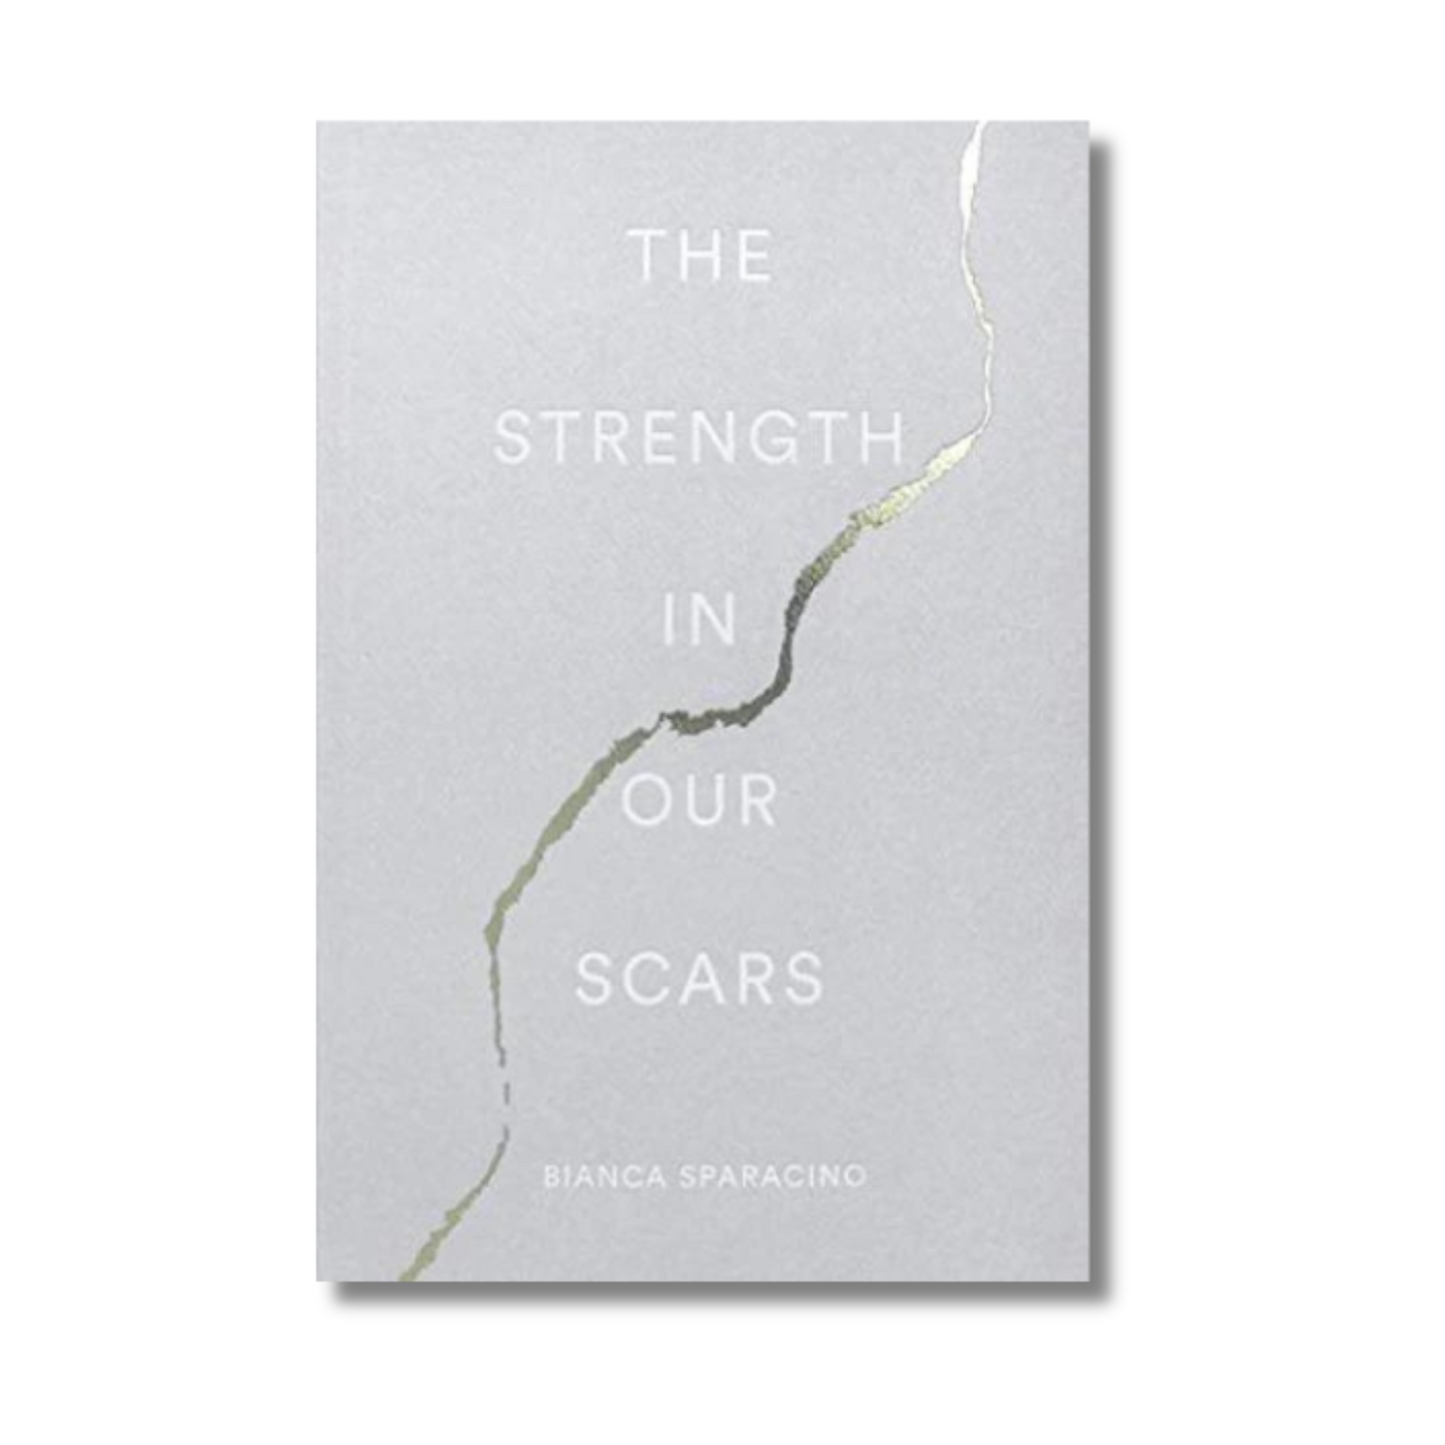 The Strength In Our Scars by Bianca Sparacino (Paperback)